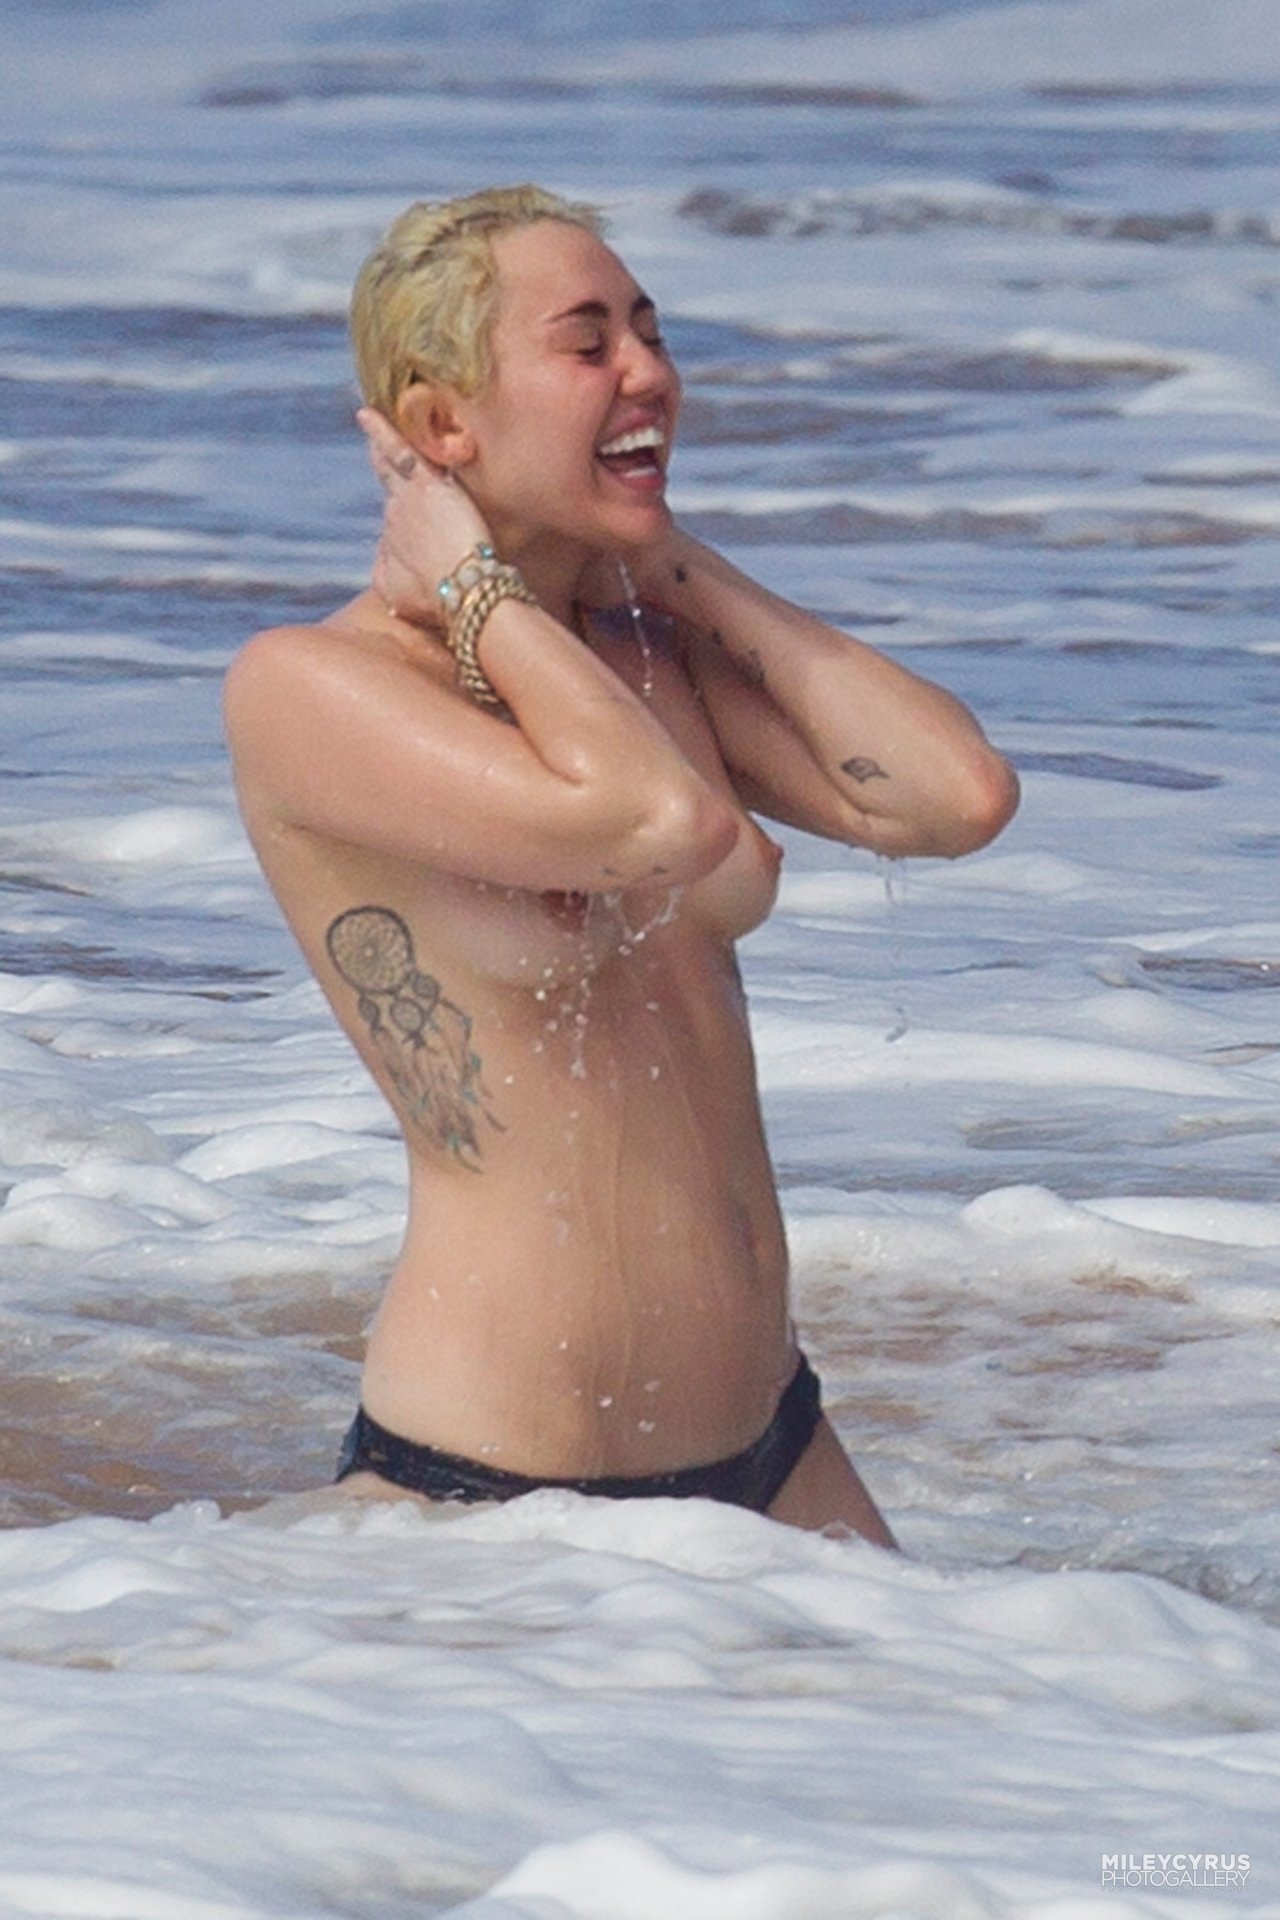 Miley cyrus topless horse